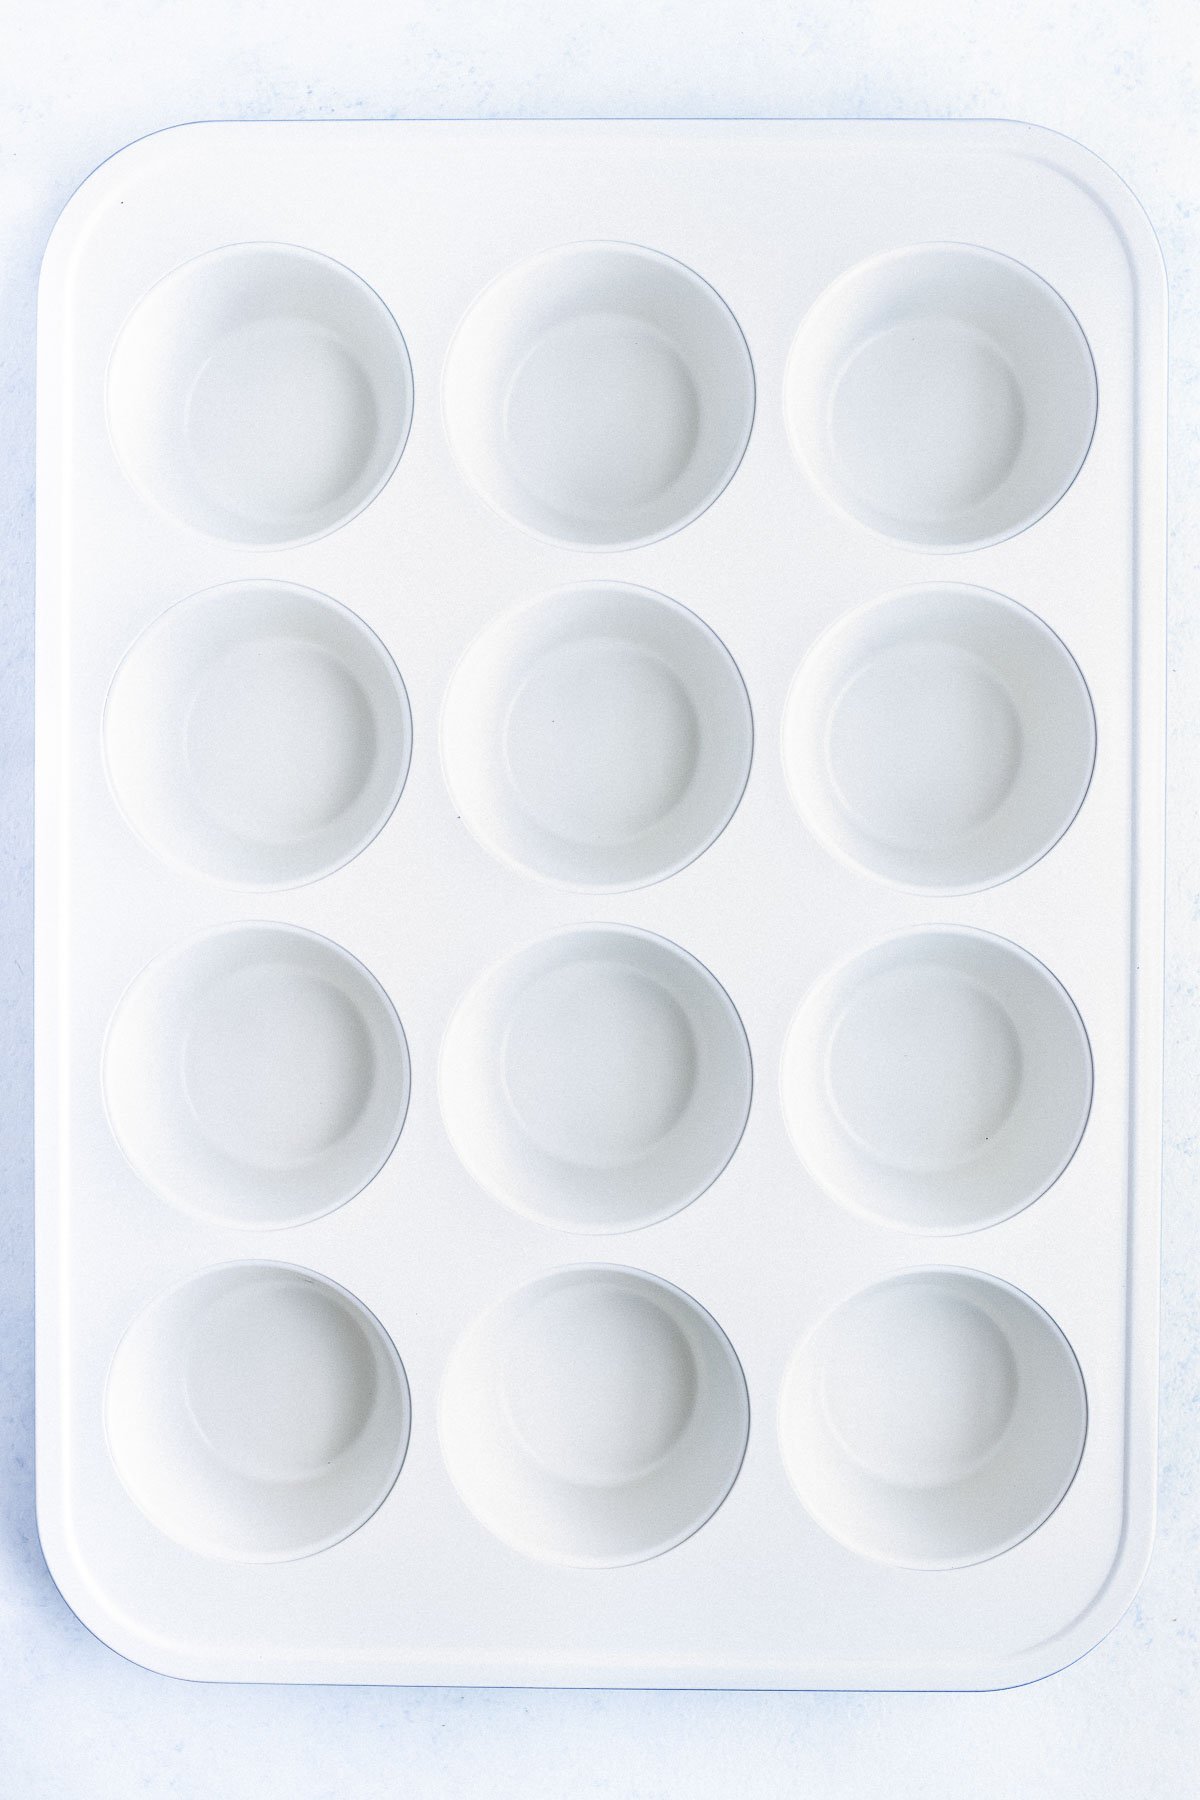 Be sure to choose the right type of muffin tin.